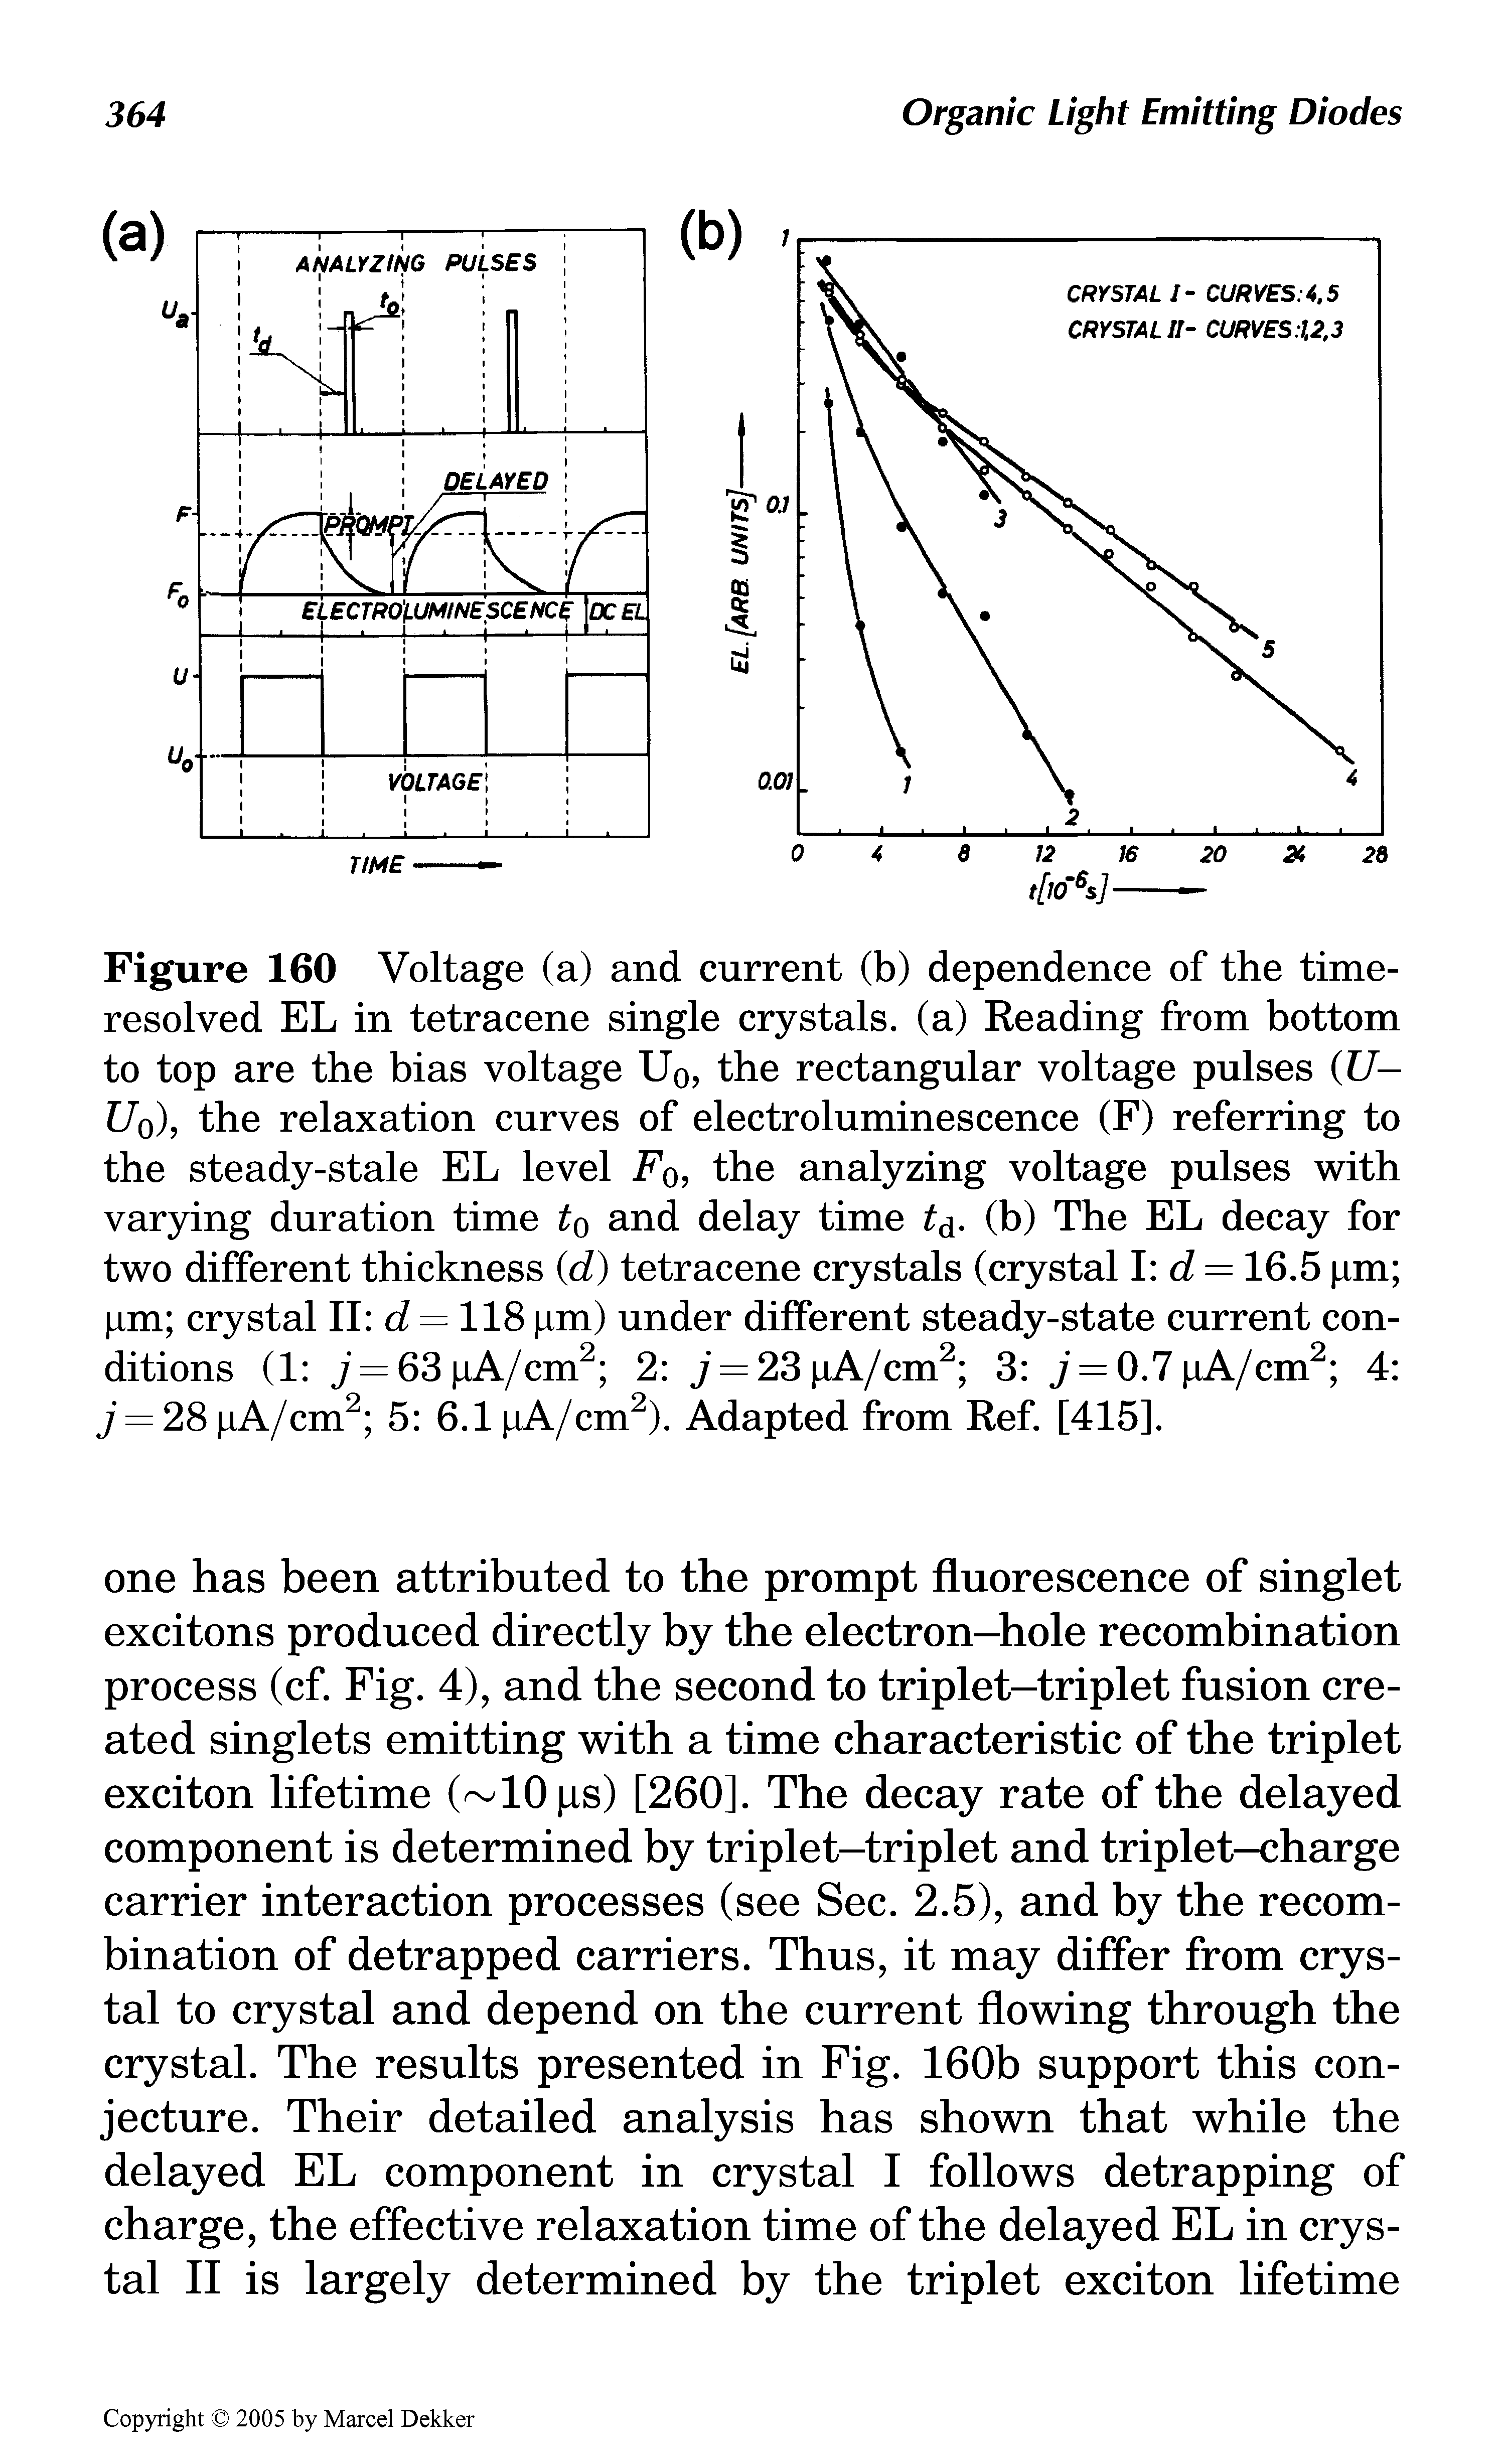 Figure 160 Voltage (a) and current (b) dependence of the time-resolved EL in tetracene single crystals, (a) Reading from bottom to top are the bias voltage Uo, the rectangular voltage pulses (U— U0), the relaxation curves of electroluminescence (F) referring to the steady-stale EL level F0, the analyzing voltage pulses with varying duration time to and delay time t(. (b) The EL decay for two different thickness (d) tetracene crystals (crystal I d 16.5 pm pm crystal II d = 118 pm) under different steady-state current conditions (1 j 63 pA/cirr 2 j 23 pA/cm2 3 j = 0.7 pA/cm2 4 / 28 pA/cirr 5 6.1 pA/cm2). Adapted from Ref. [415],...